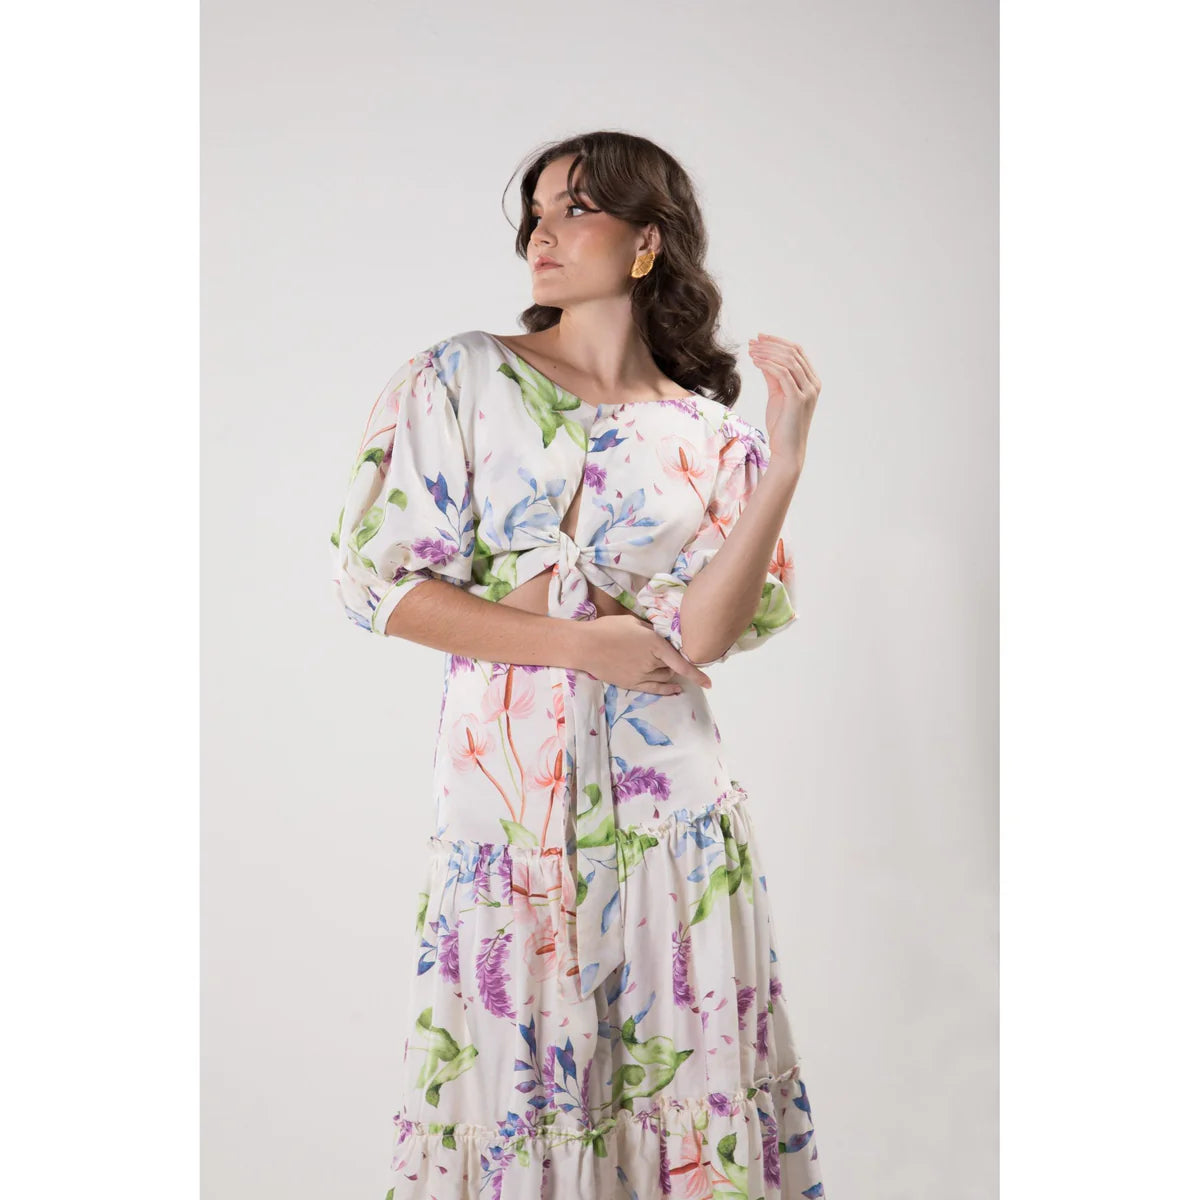 Style a Floral Dress for this Spring Season